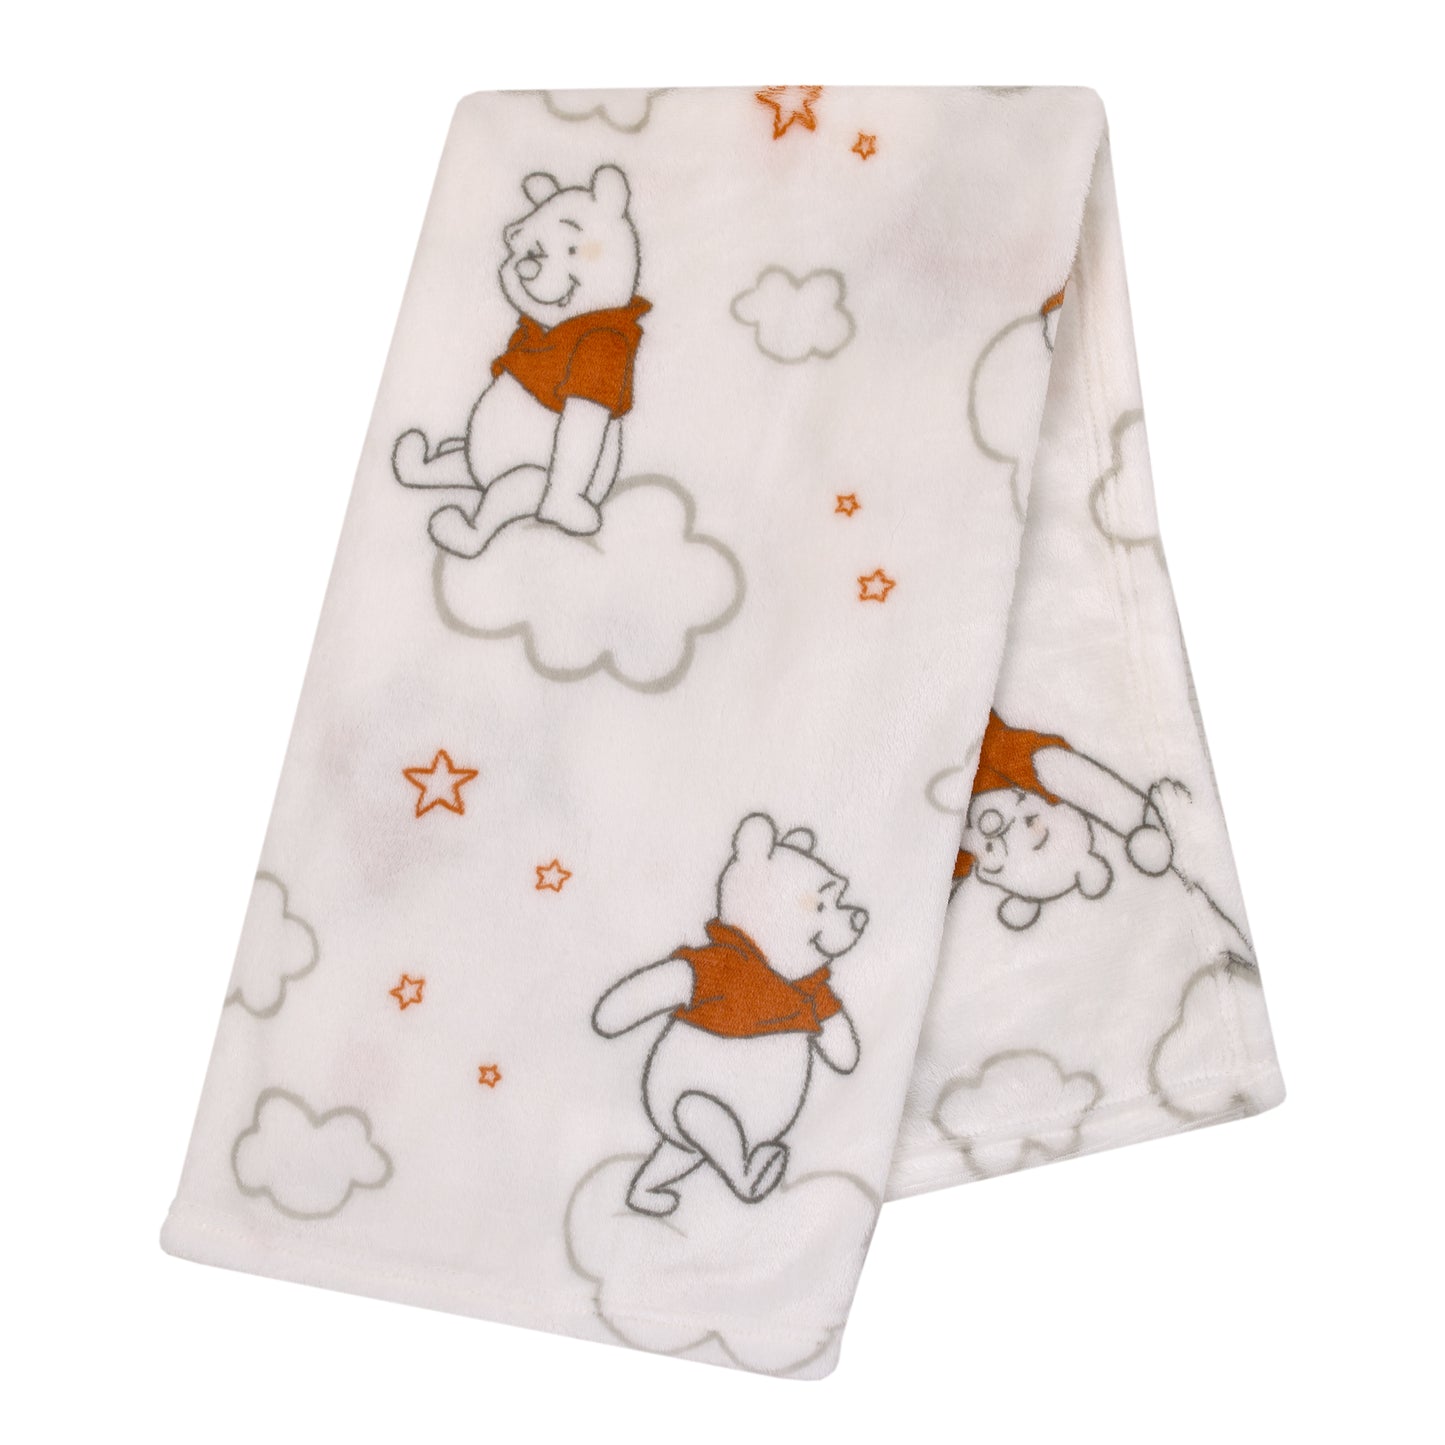 Disney Winnie the Pooh Red and White Clouds Super Soft Baby Blanket